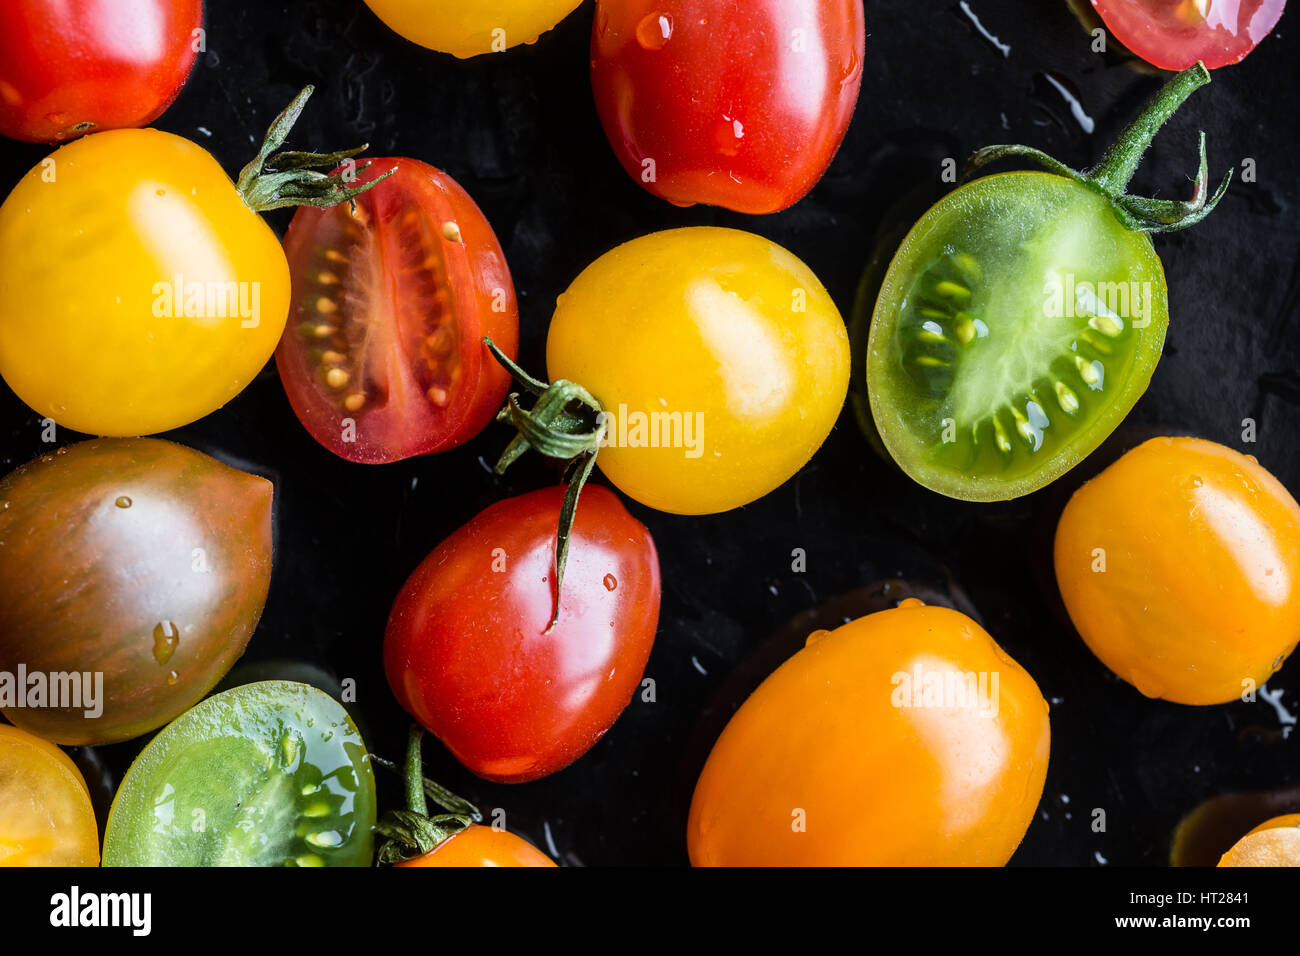 Multi-colored tomatoes on black background Stock Photo